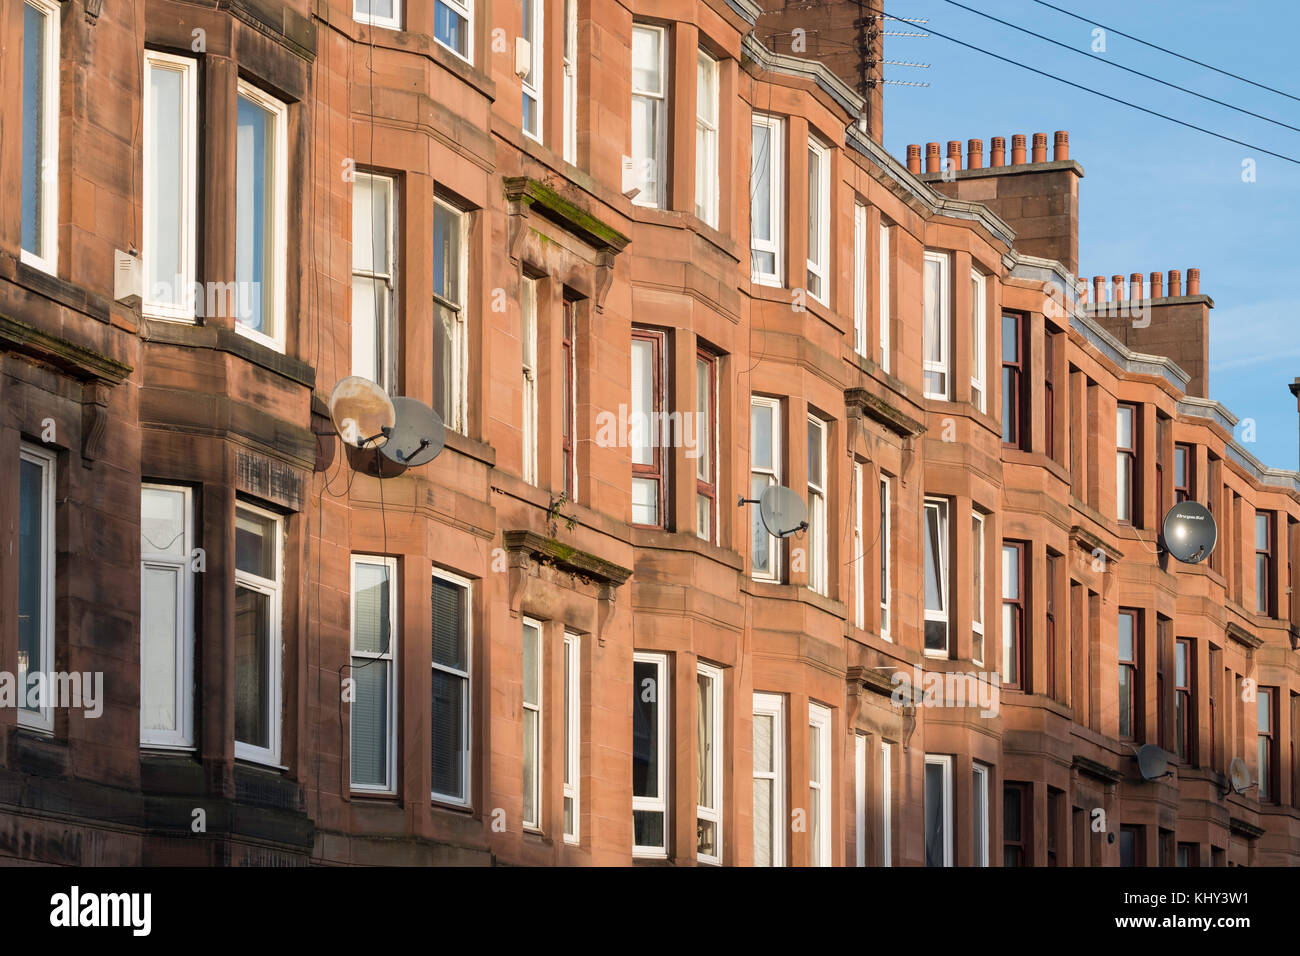 Tenement apartment building in deprived Govanhill district of Glasgow, Scotland, United Kingdom Stock Photo